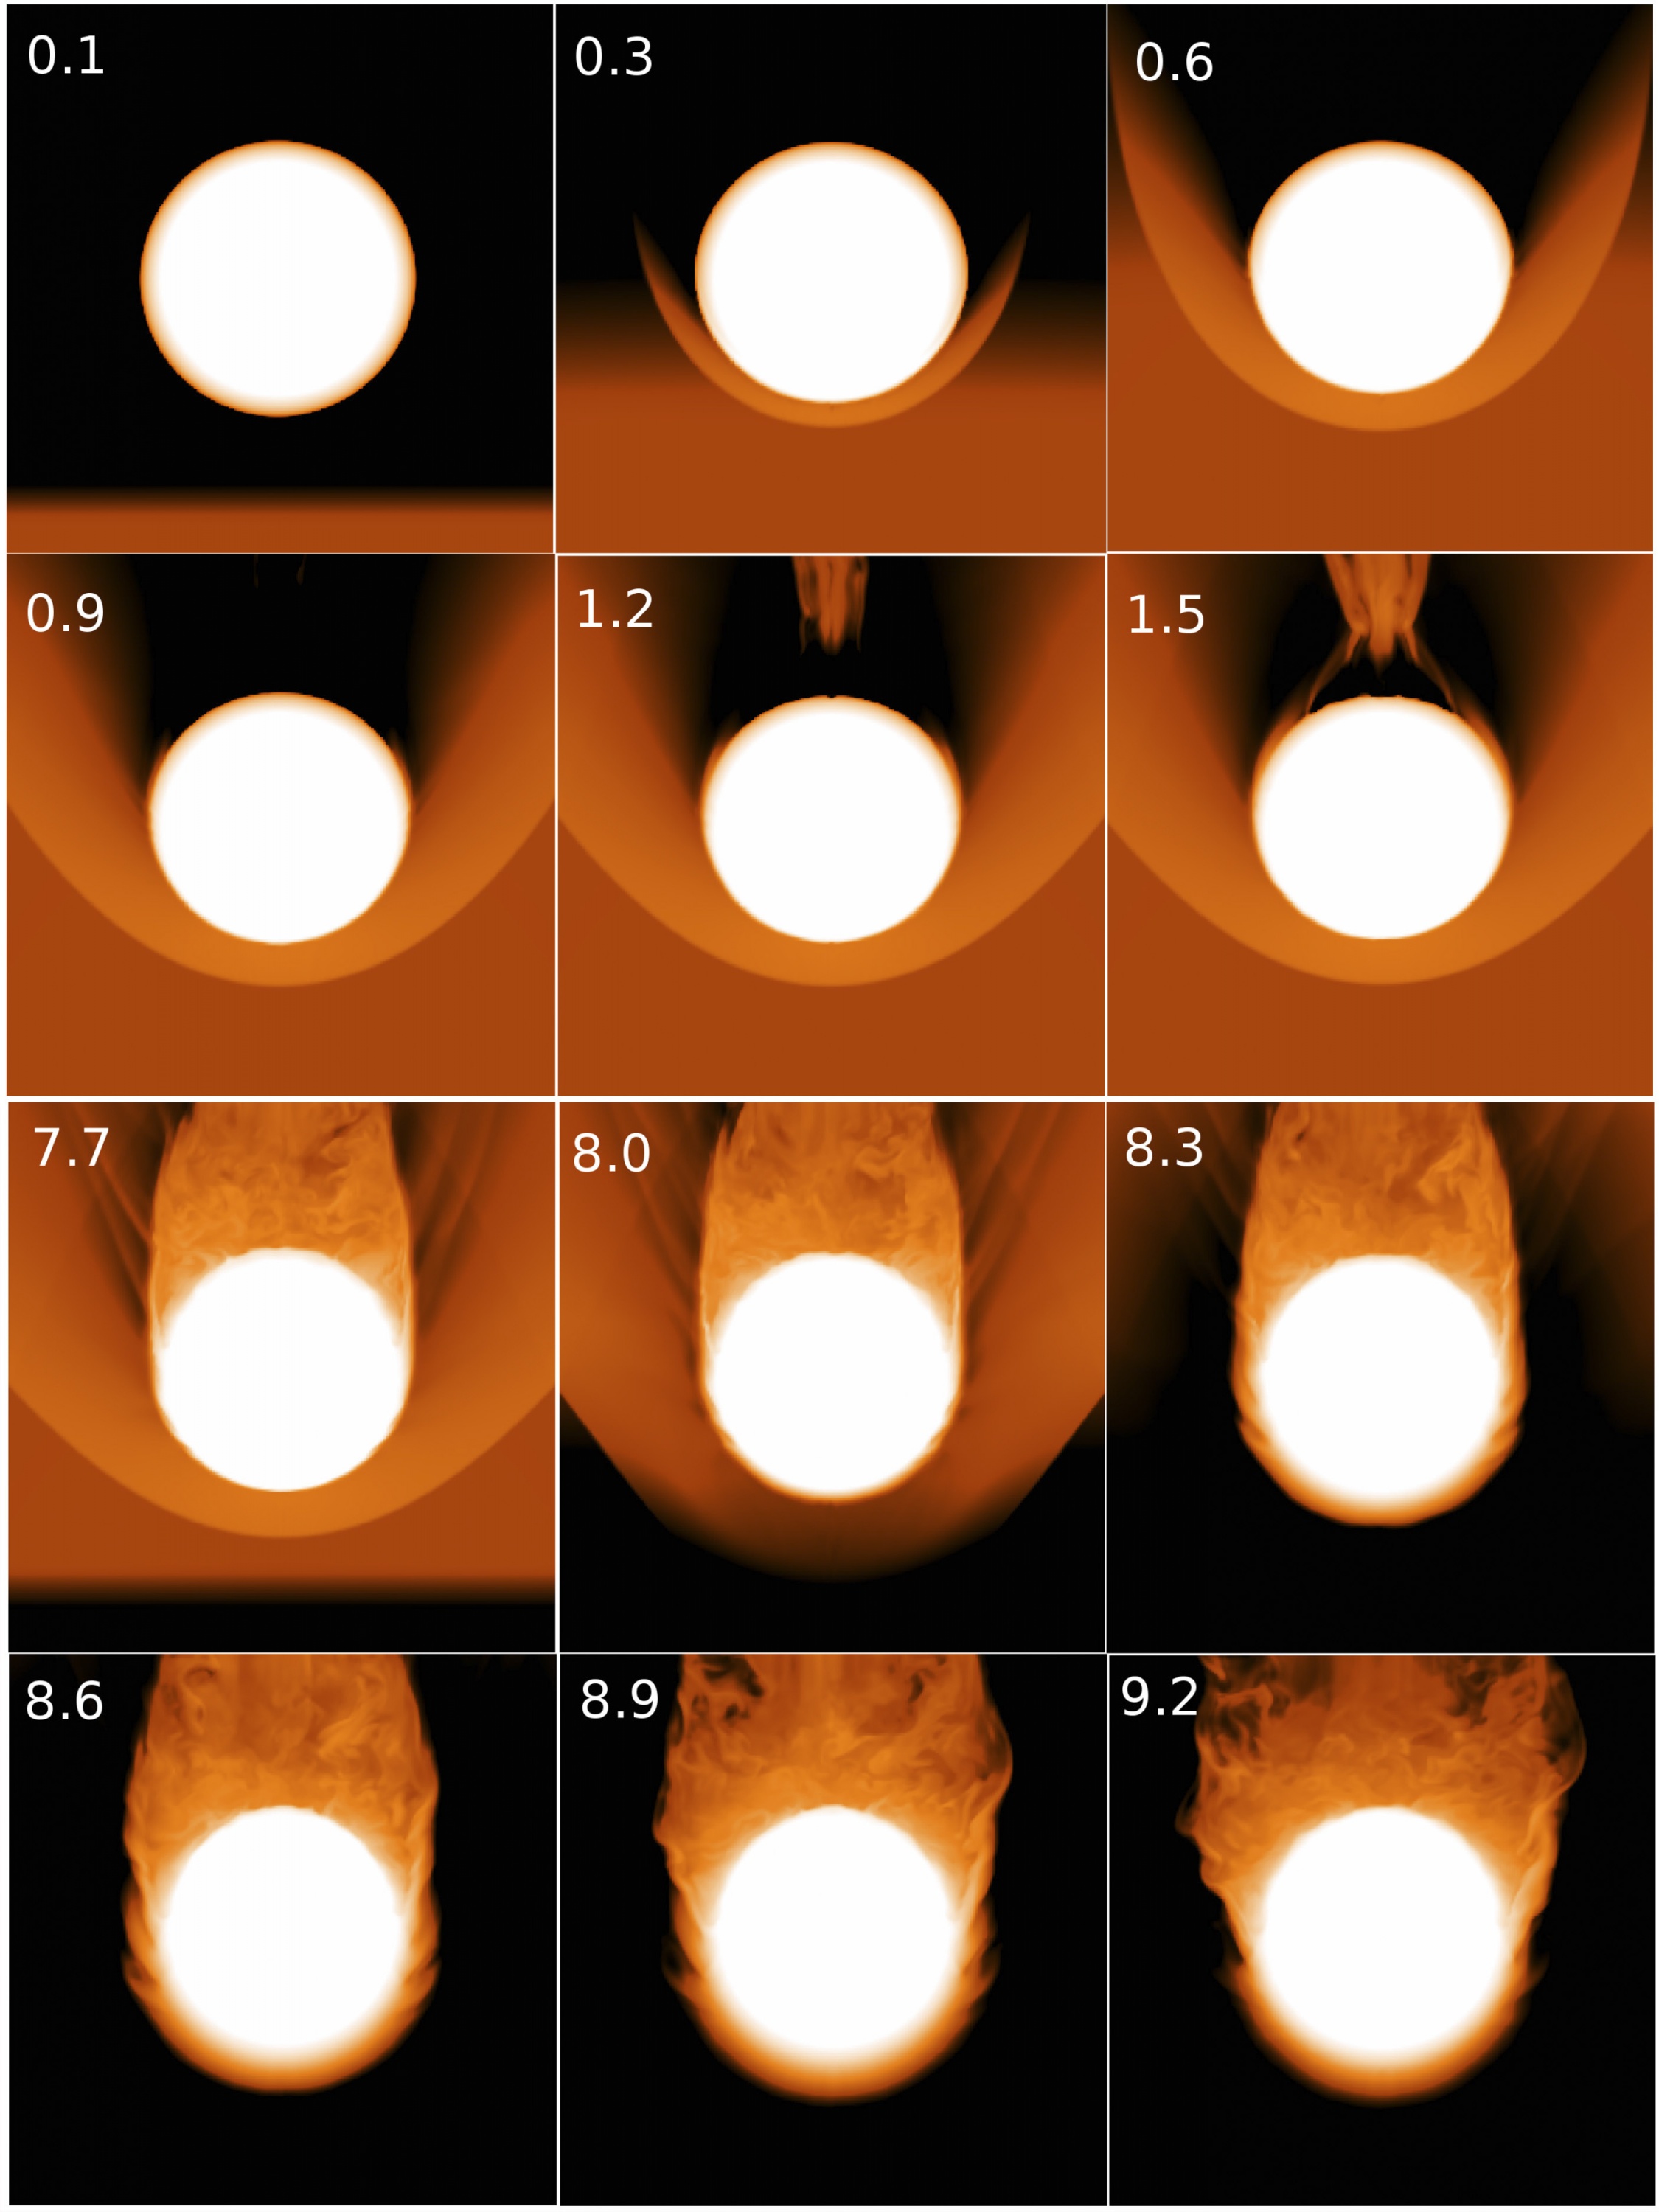 A sequence of snap shots based on a simulation of a red giant entering and exiting a clump in a fragmenting accretion disk. In this case, it takes 4 days for the star to travel through the clump (each .1 unit of time is approximately 1 hour).  